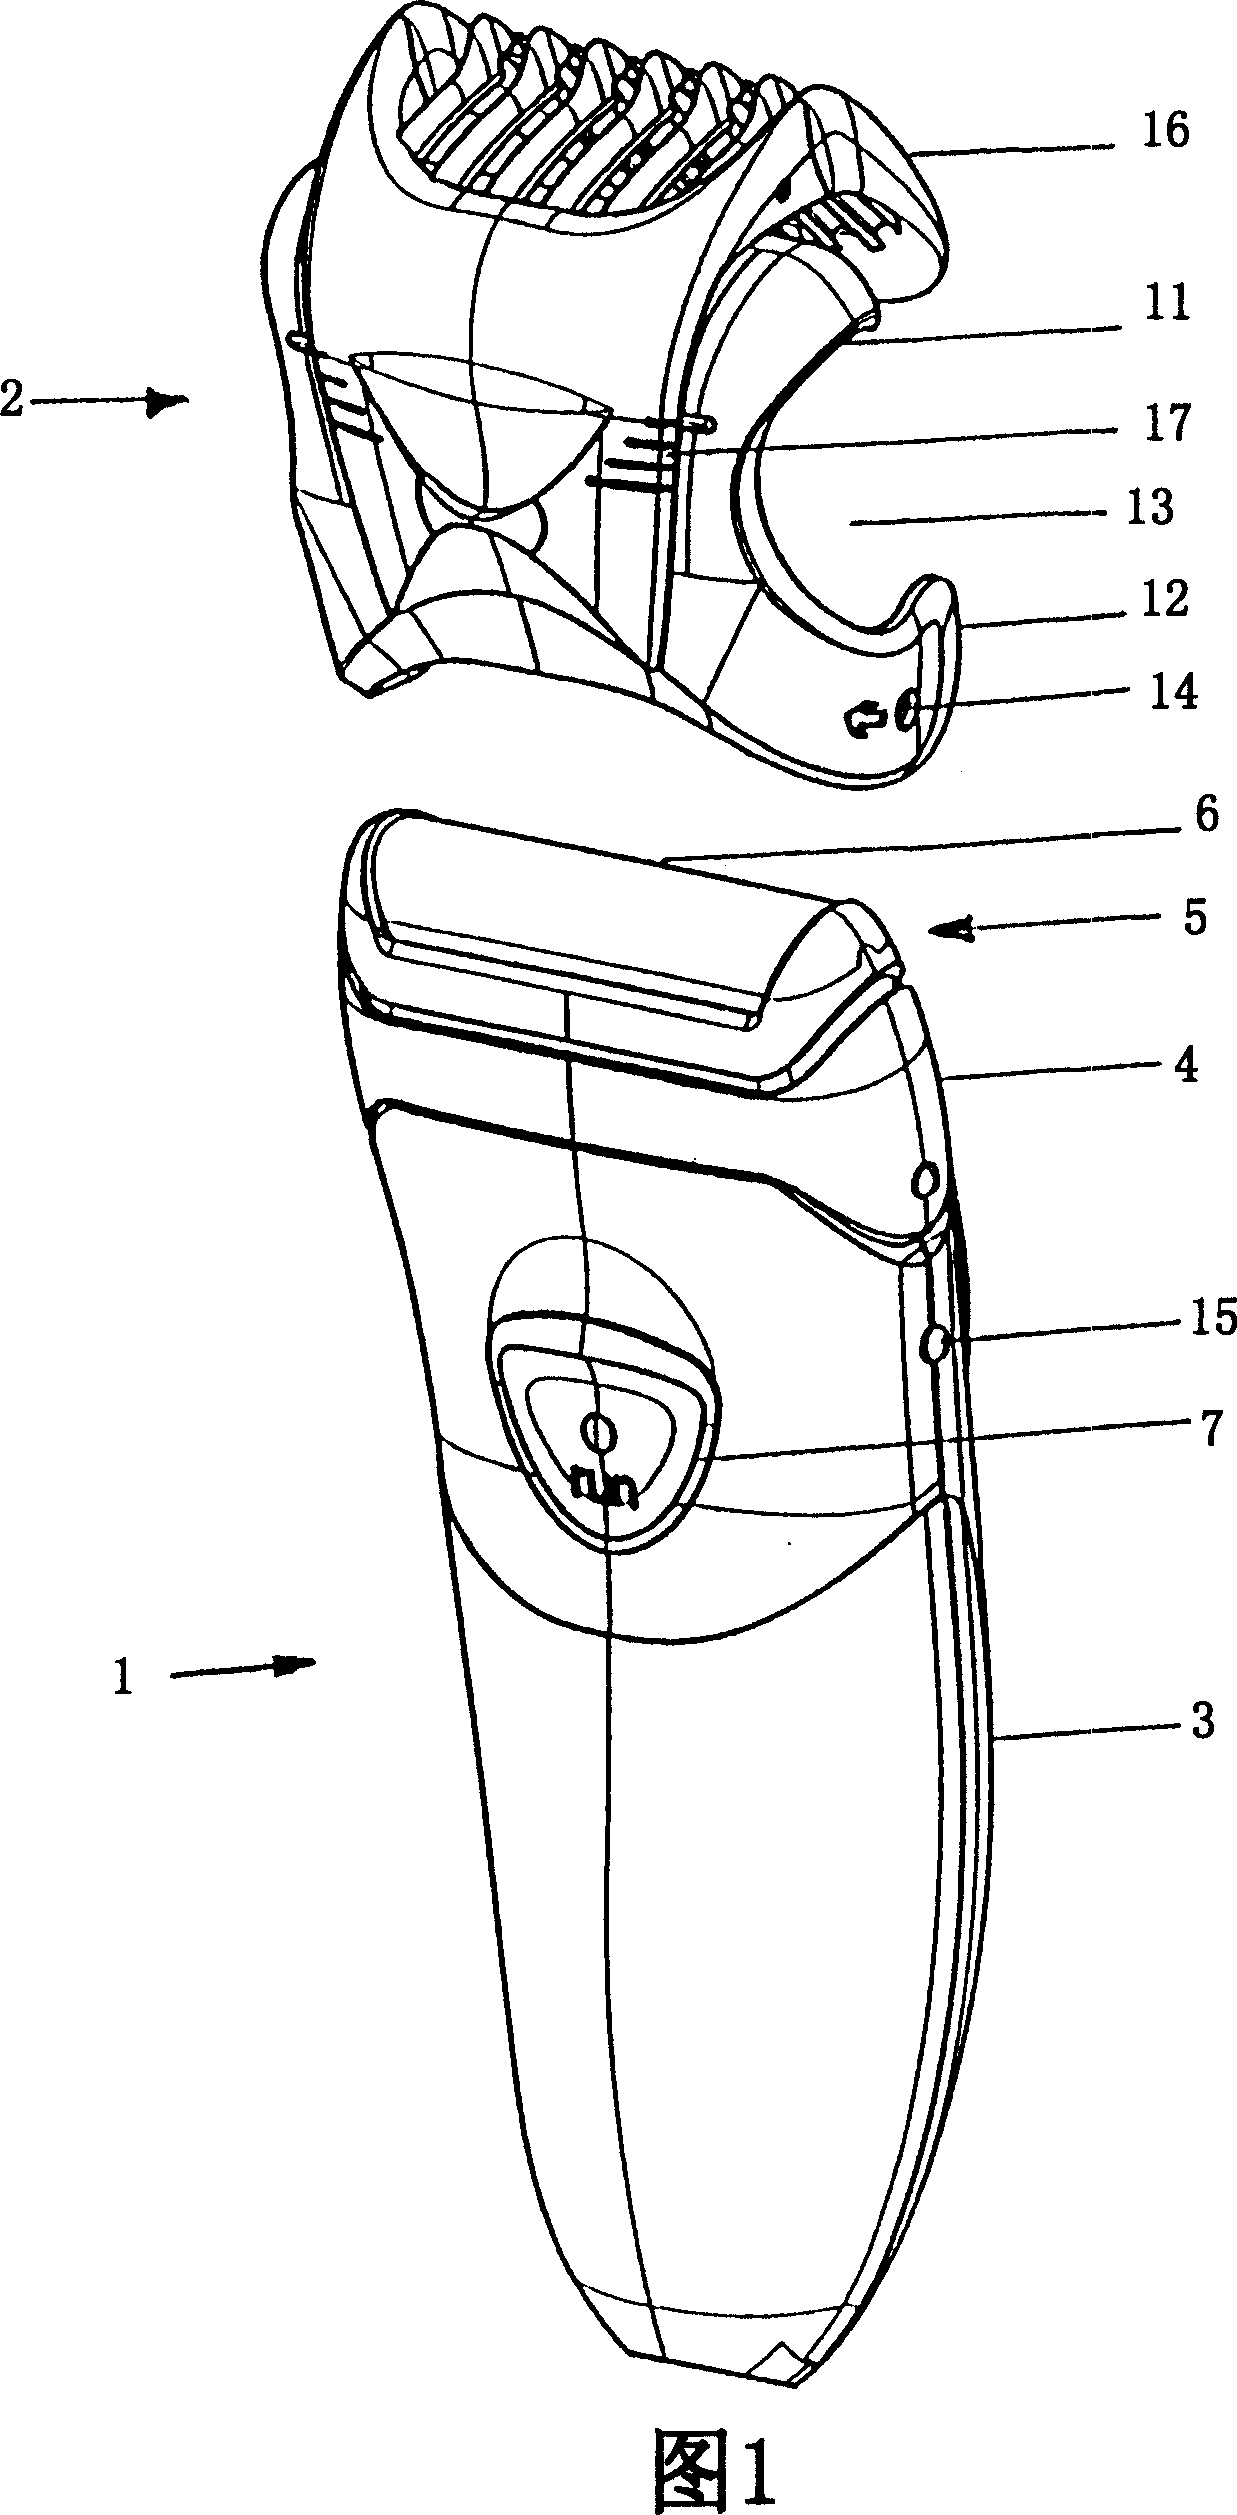 System comprising an electric razor and at least one accessory